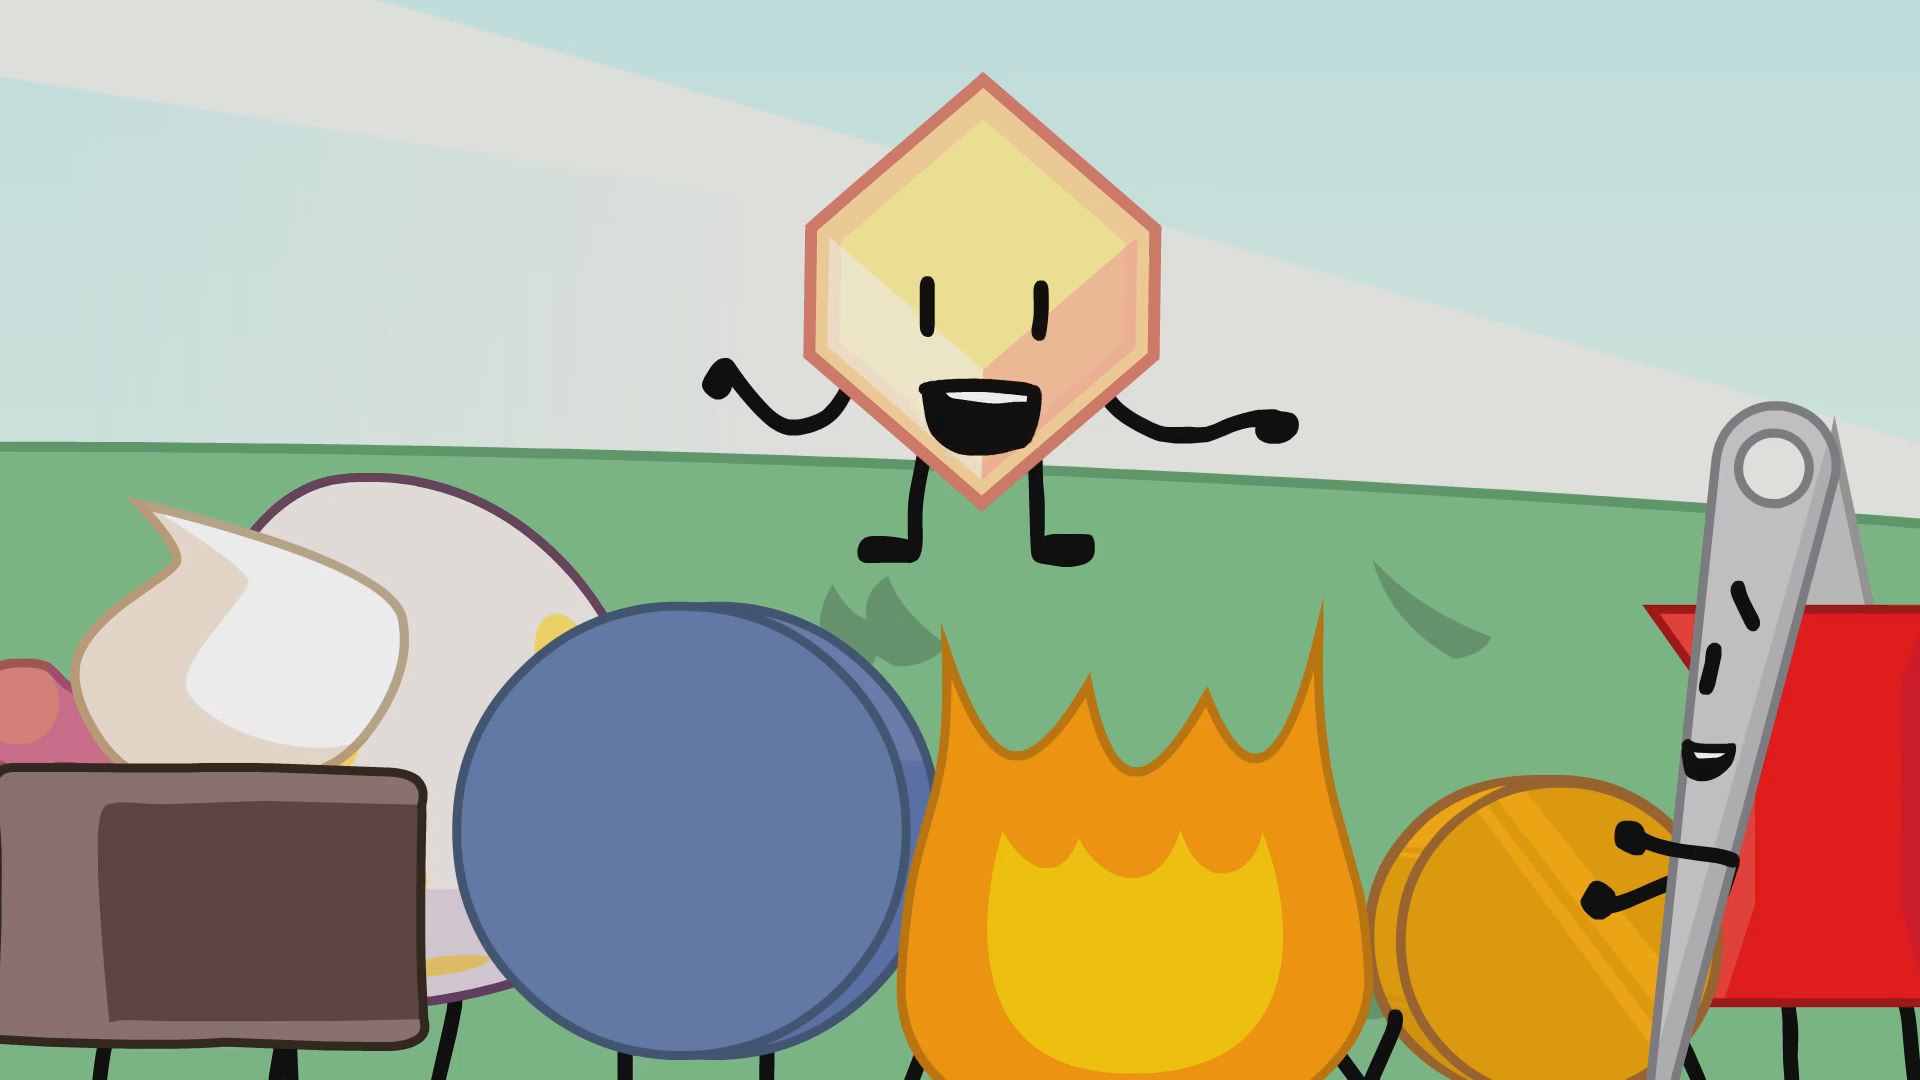 Snapping a background-worthy picture of BFDI and posting it here